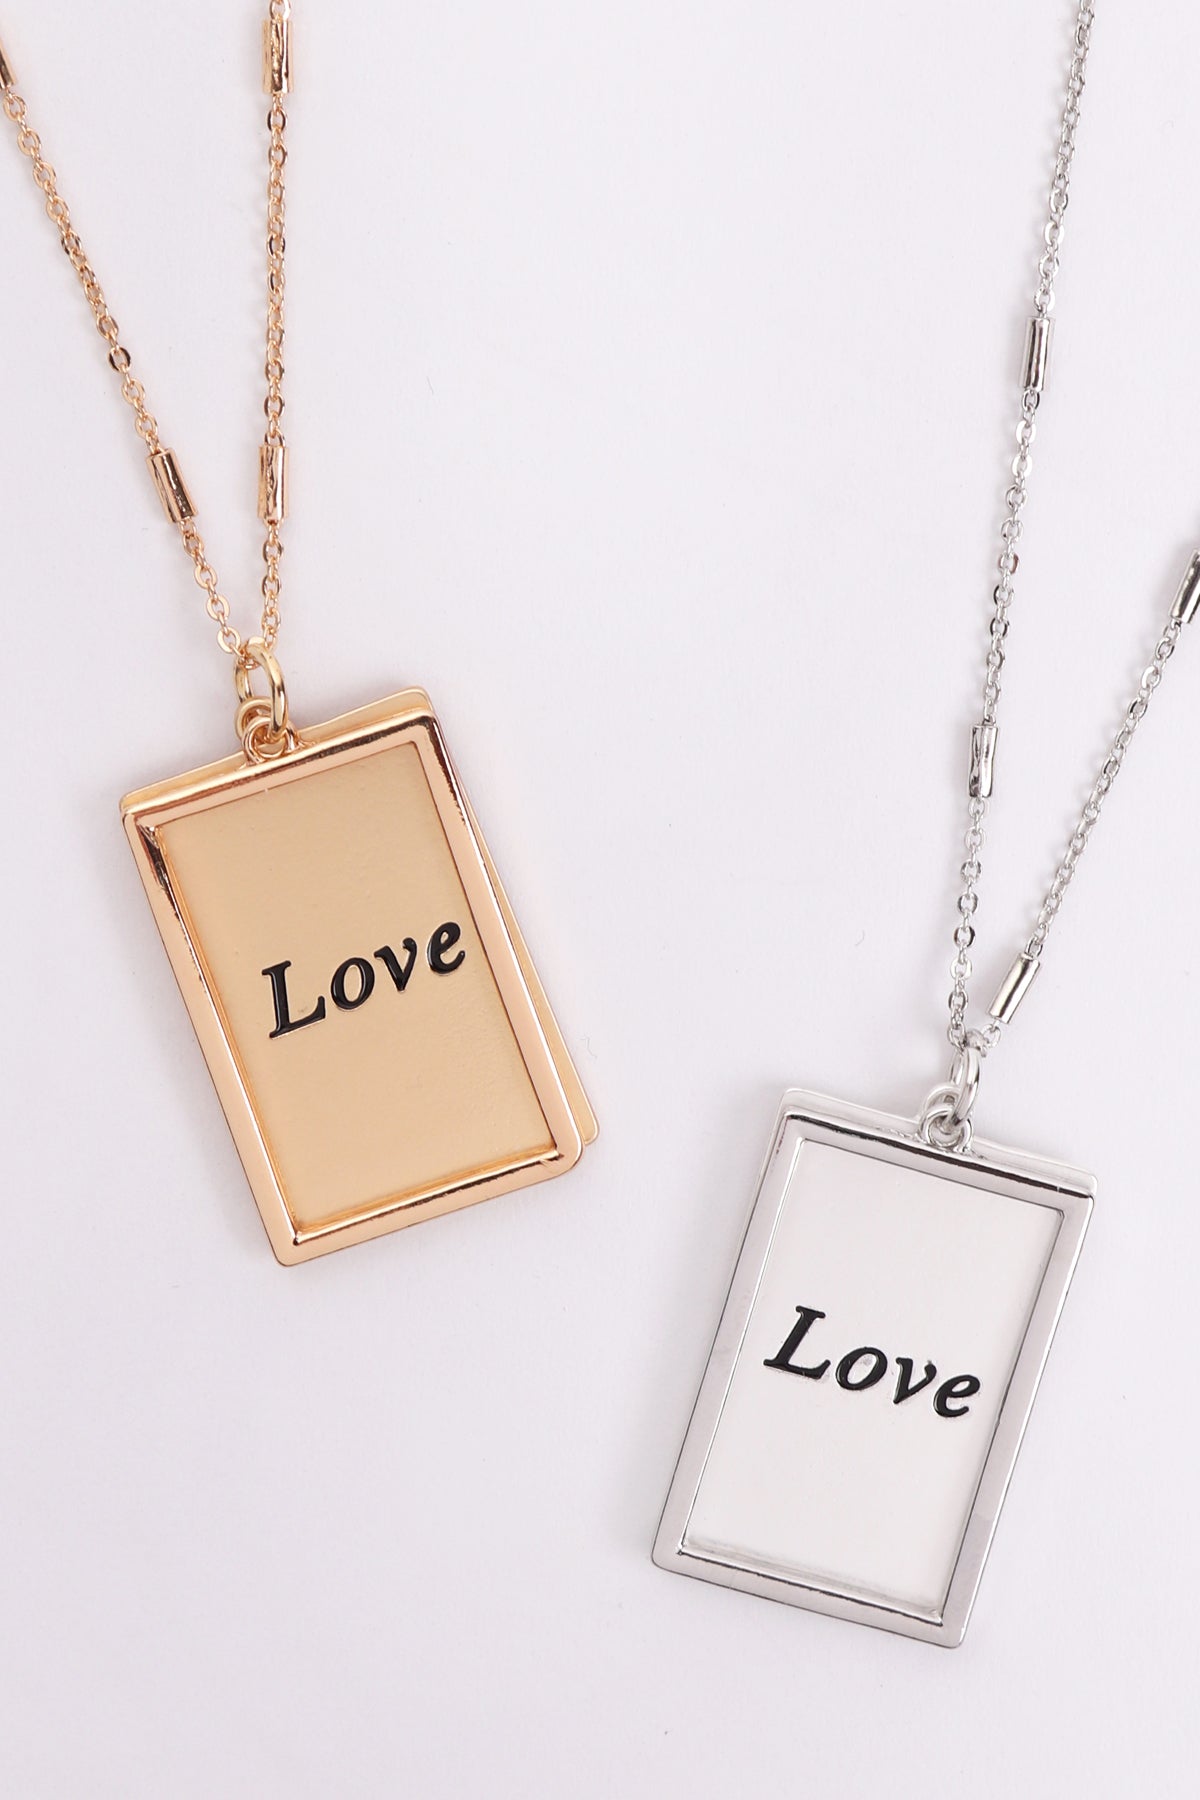 LOVE ETCHED BRASS BOX PENDANT NECKLACE